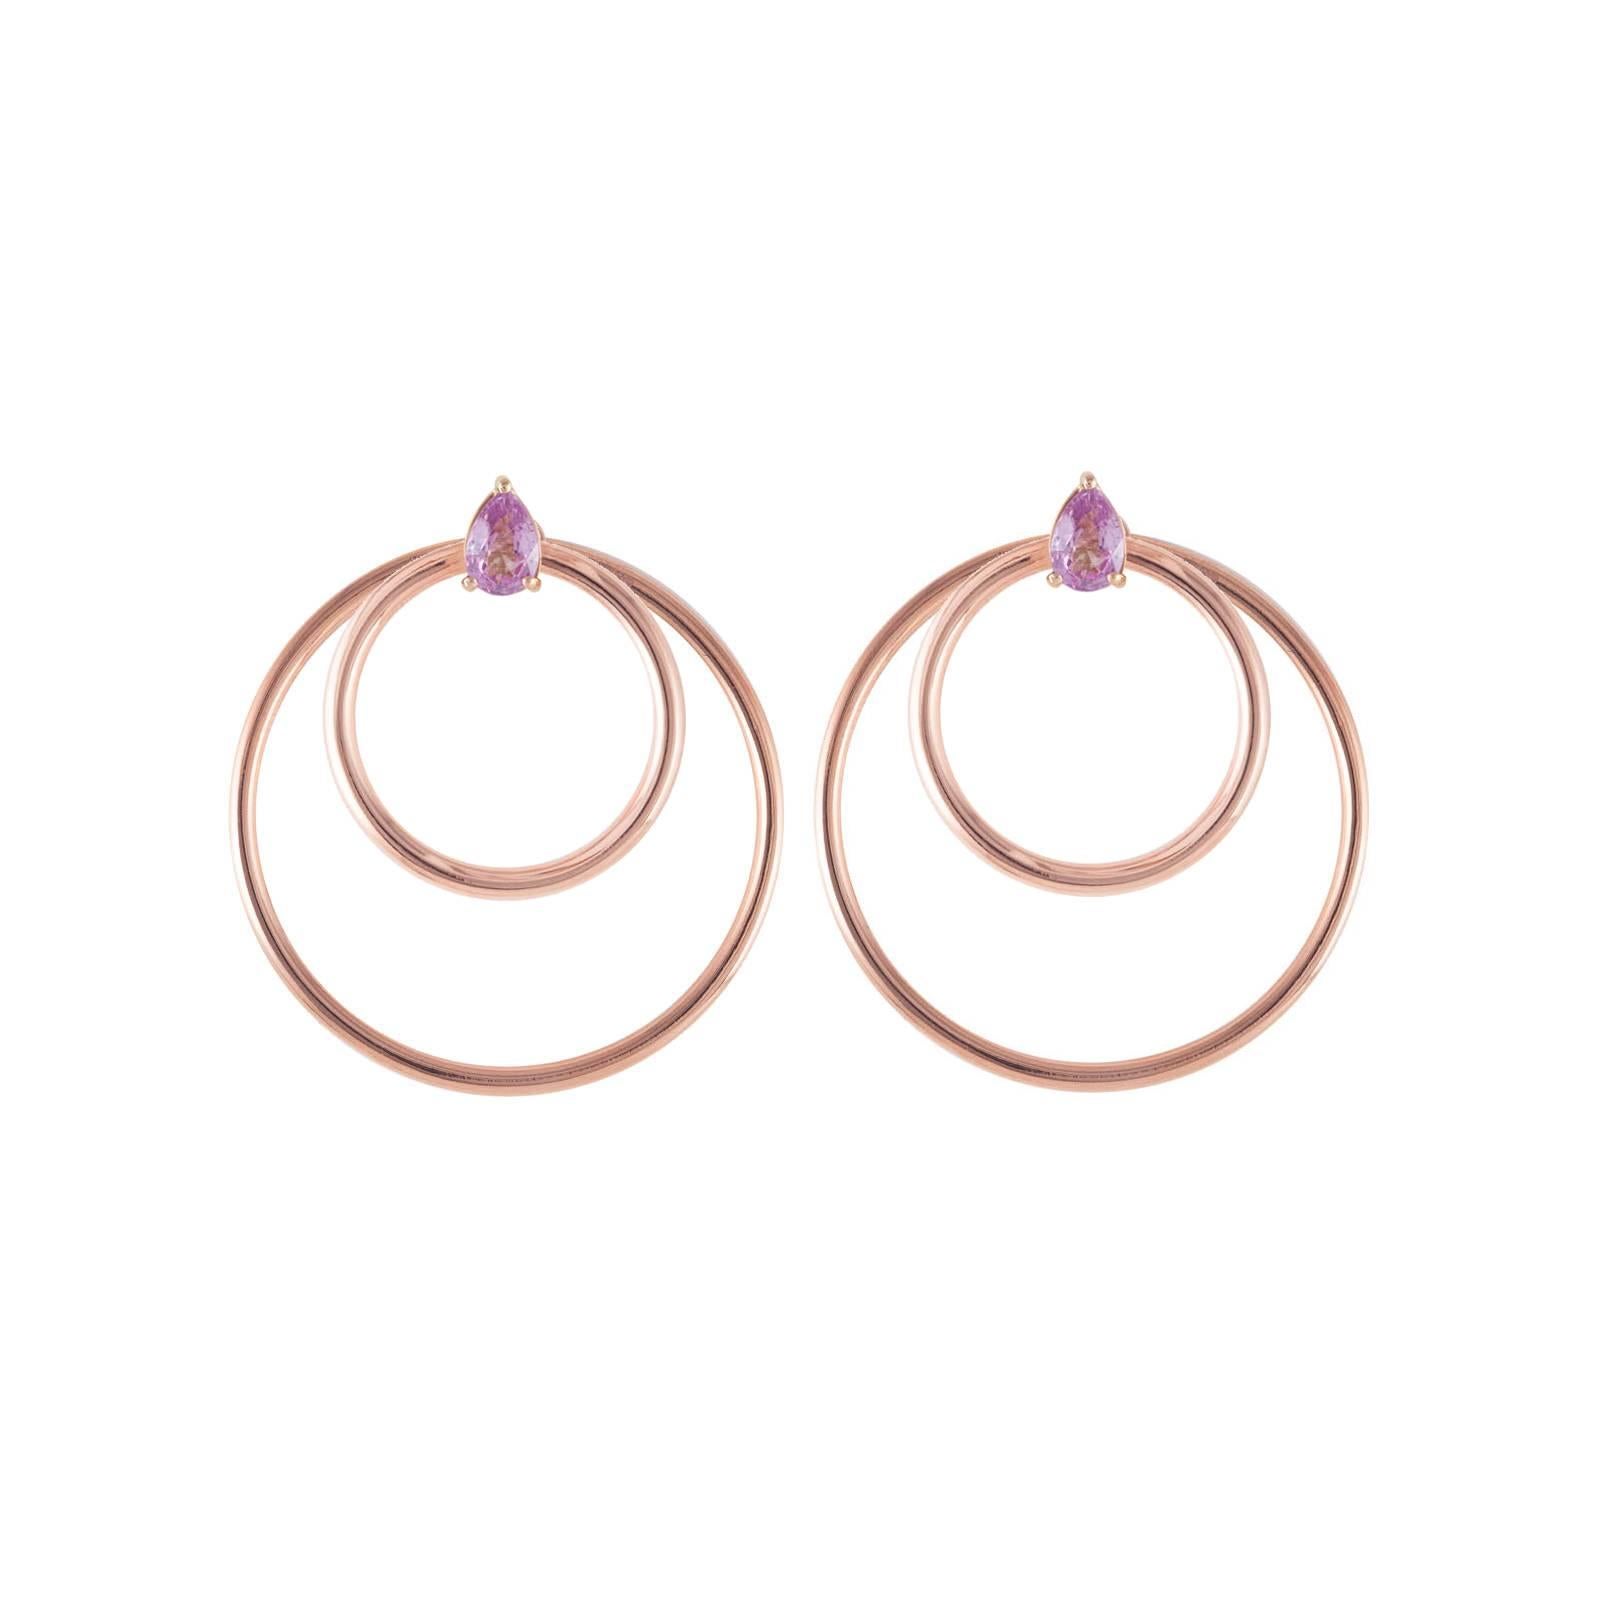 Pink Sapphire and rose gold small front facing hoop earrings. Simple chic earrings set with pear cut pink sapphires in rose pink gold. Perfectly geometrically balanced to be pleasingly elegant and flattering. A perfect complement to the Quanta